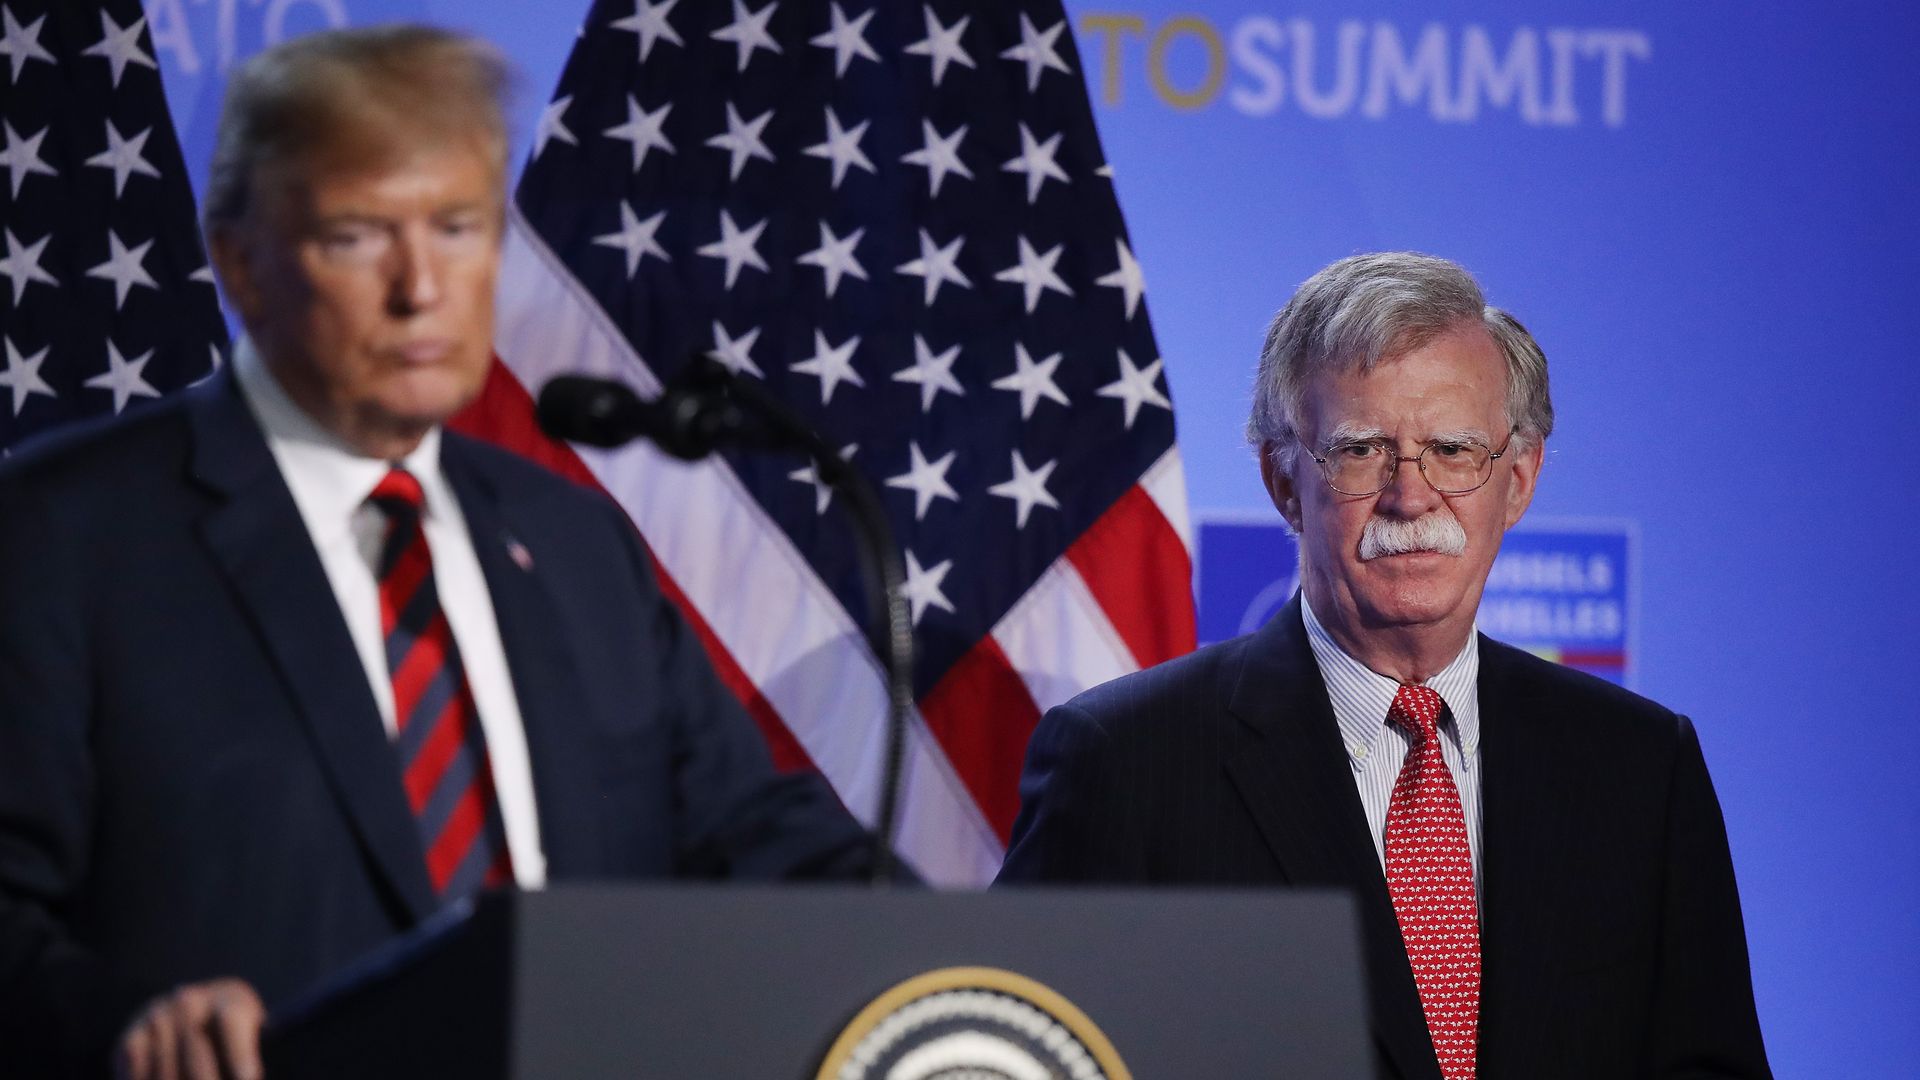 President Trump, flanked by National Security Advisor John Bolton, speaks to the media at a press conference on the second day of the 2018 NATO Summit on July 12, 2018 in Brussels, Belgium 